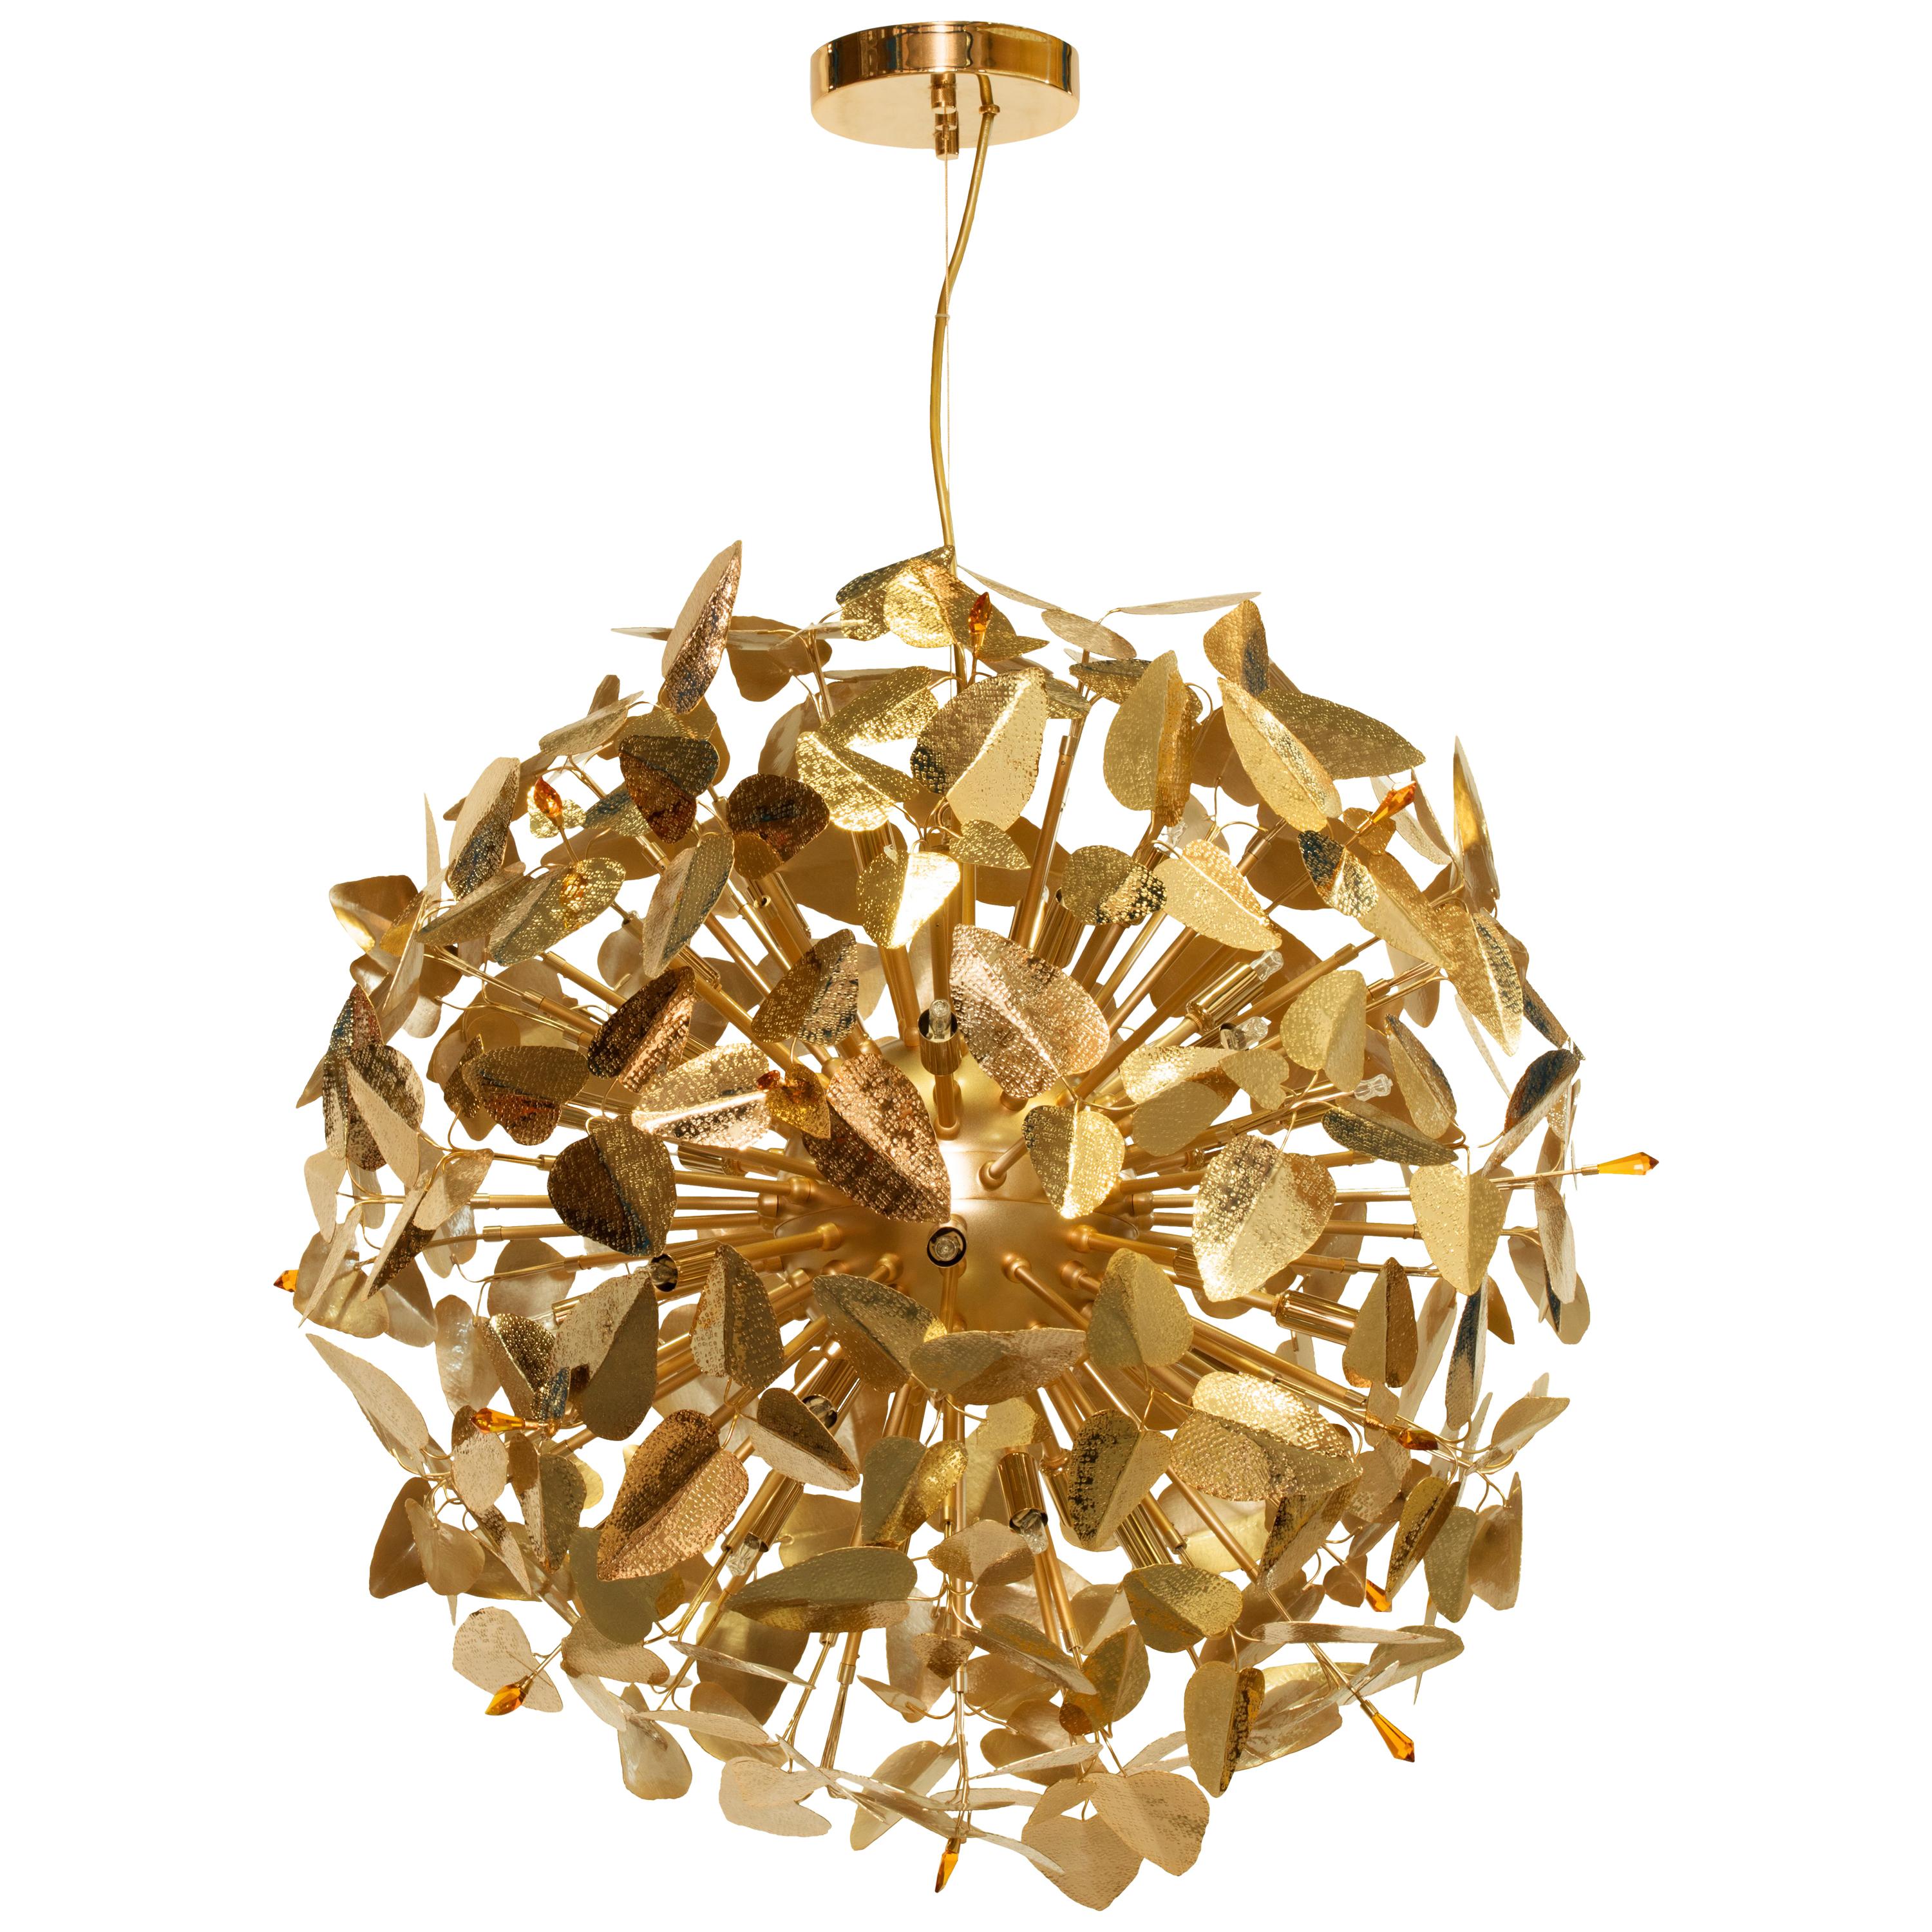 McQueen Globe Pendant Light with Amber Swarovski Crystals For Sale